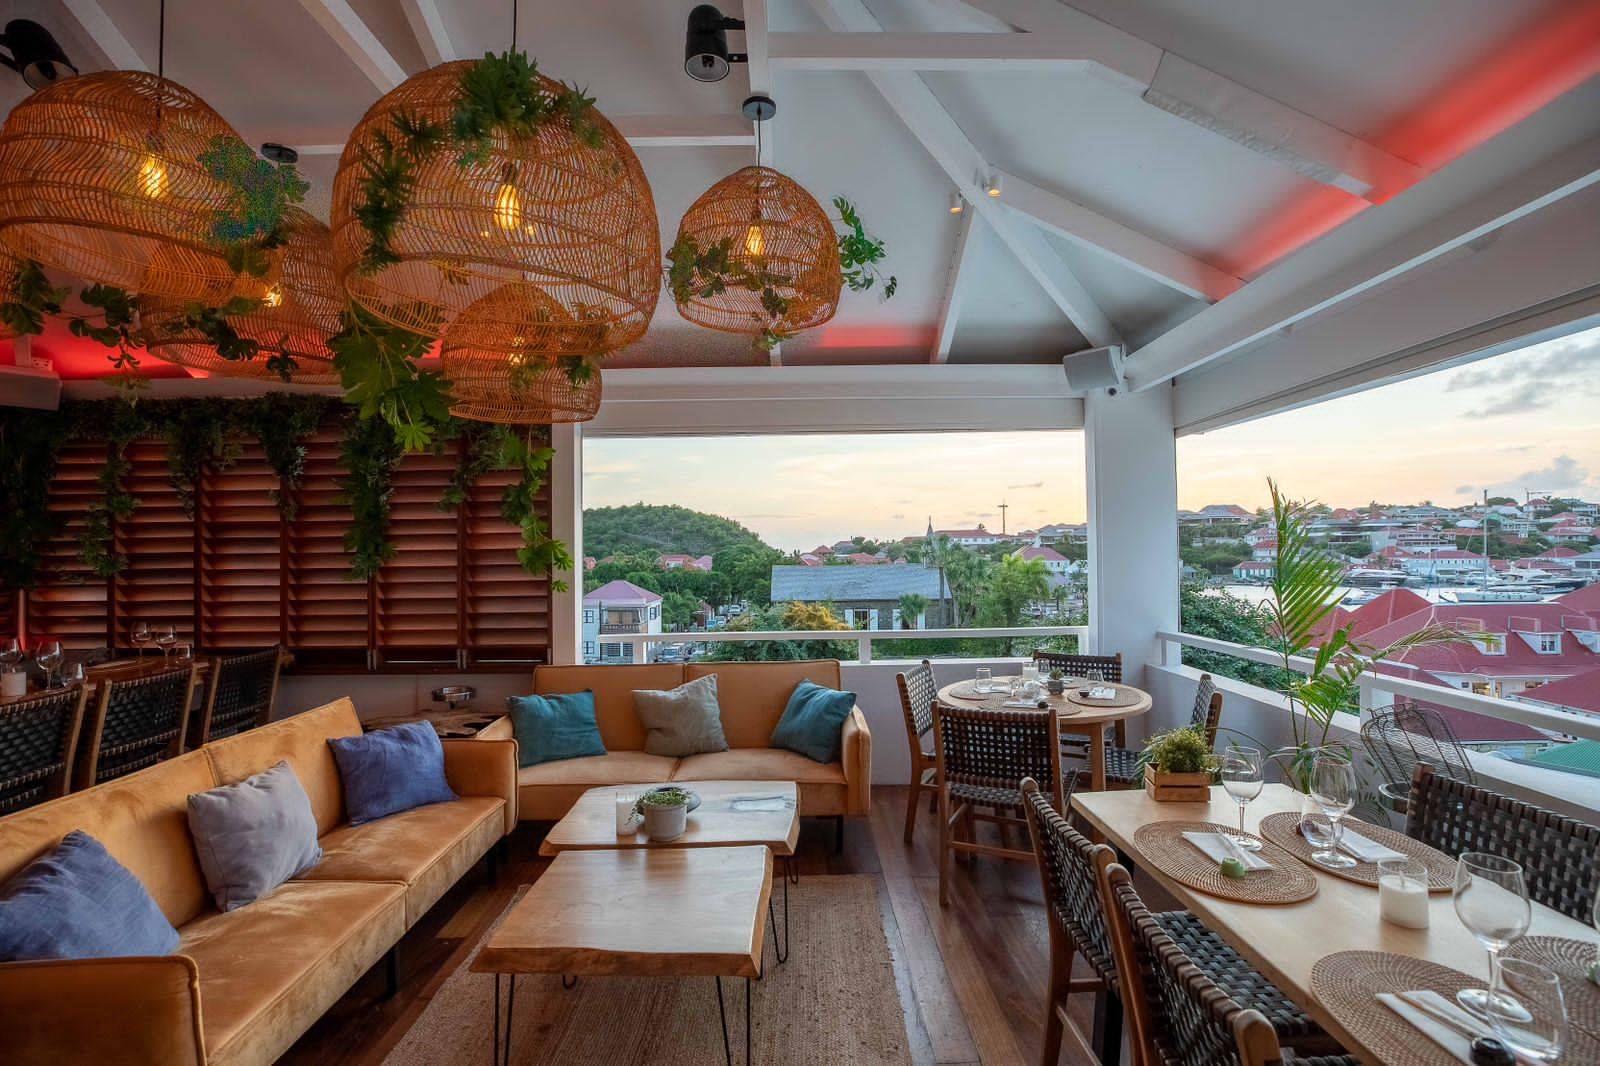 This Is The Hottest New Restaurant in St Barth